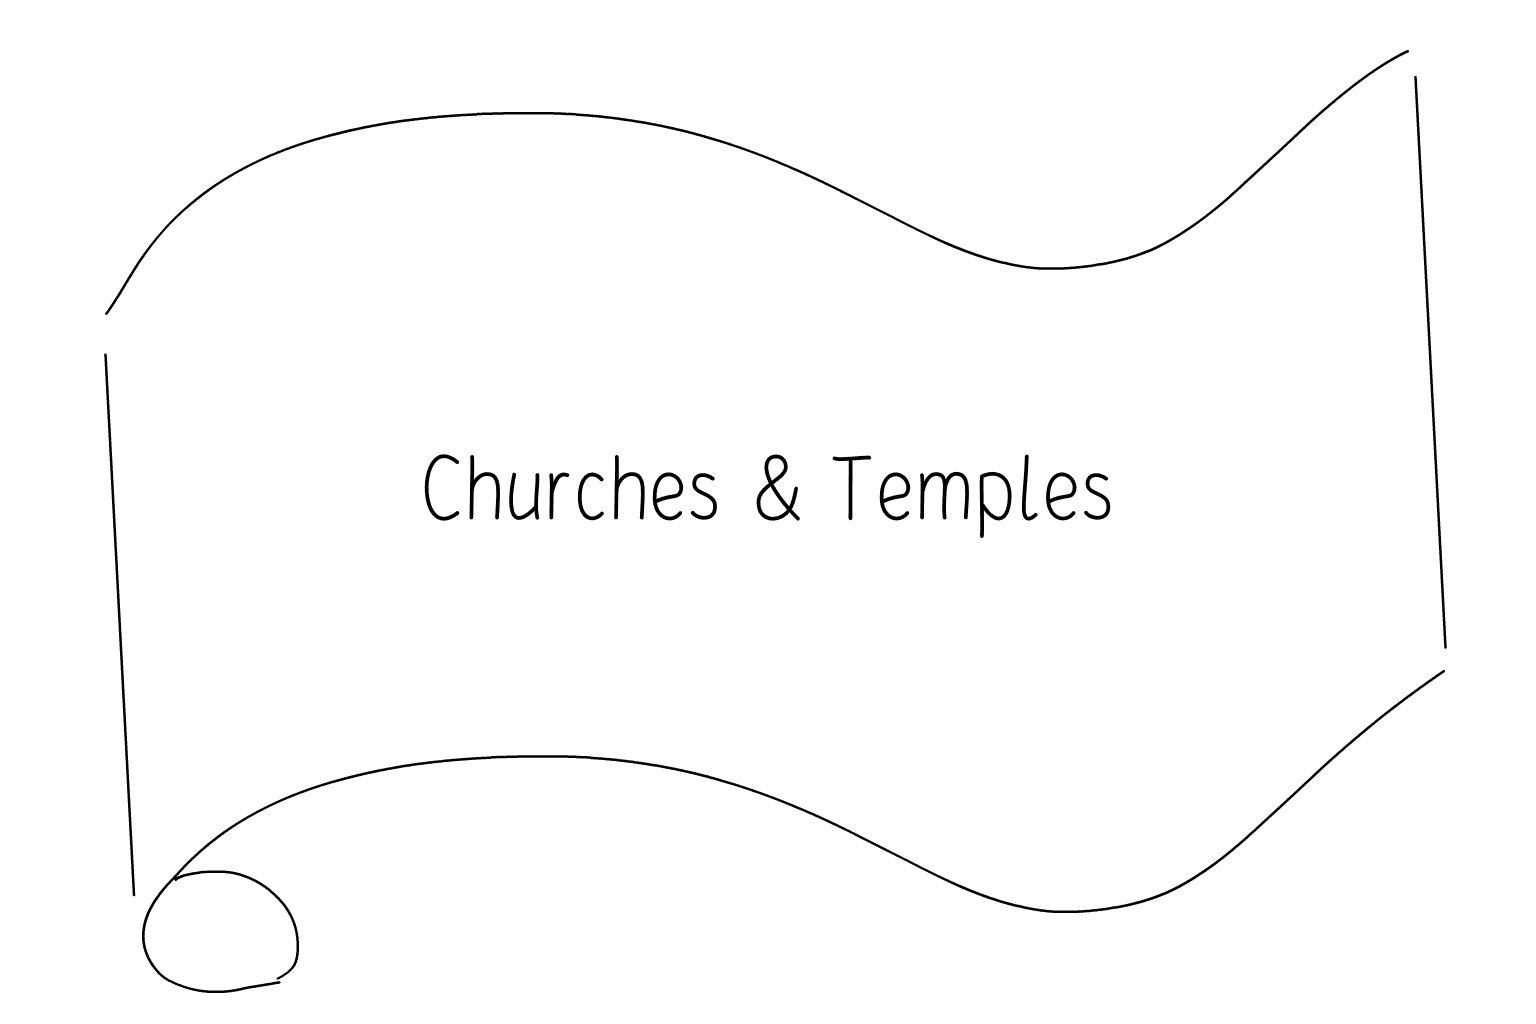 Illustration of Churches & Temples